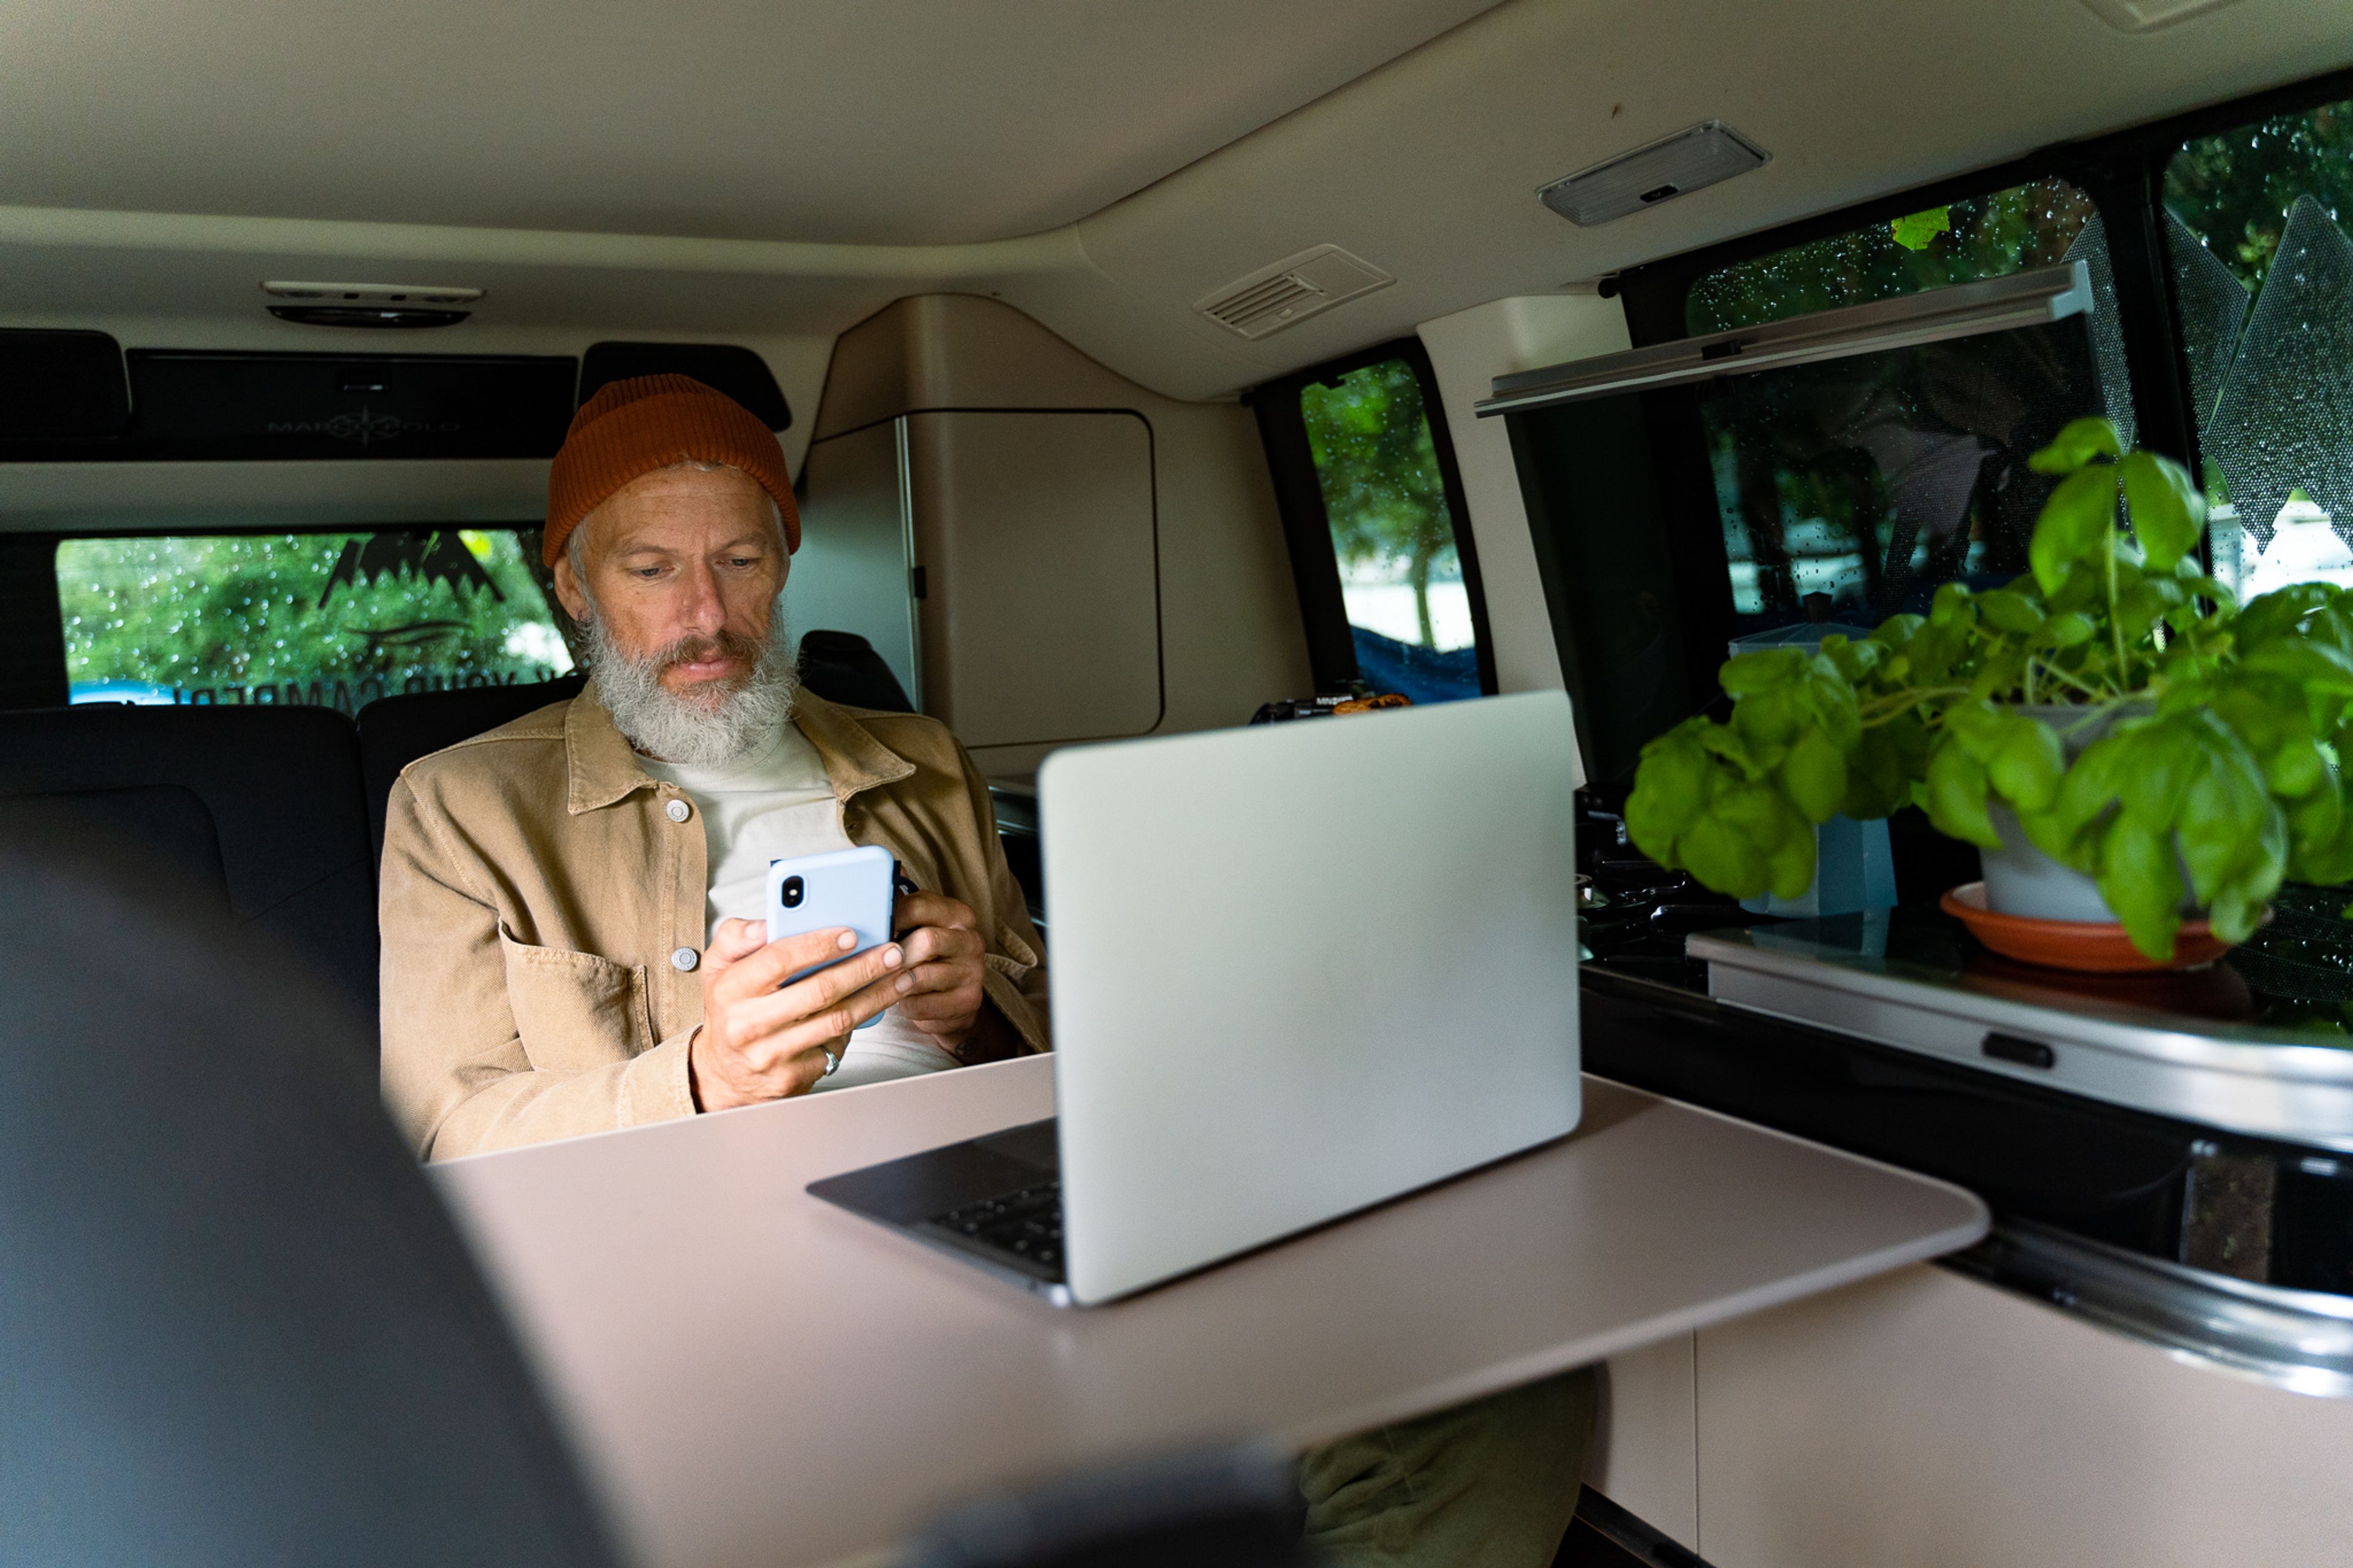 A man uses his phone and laptop in a motorhome for remote work